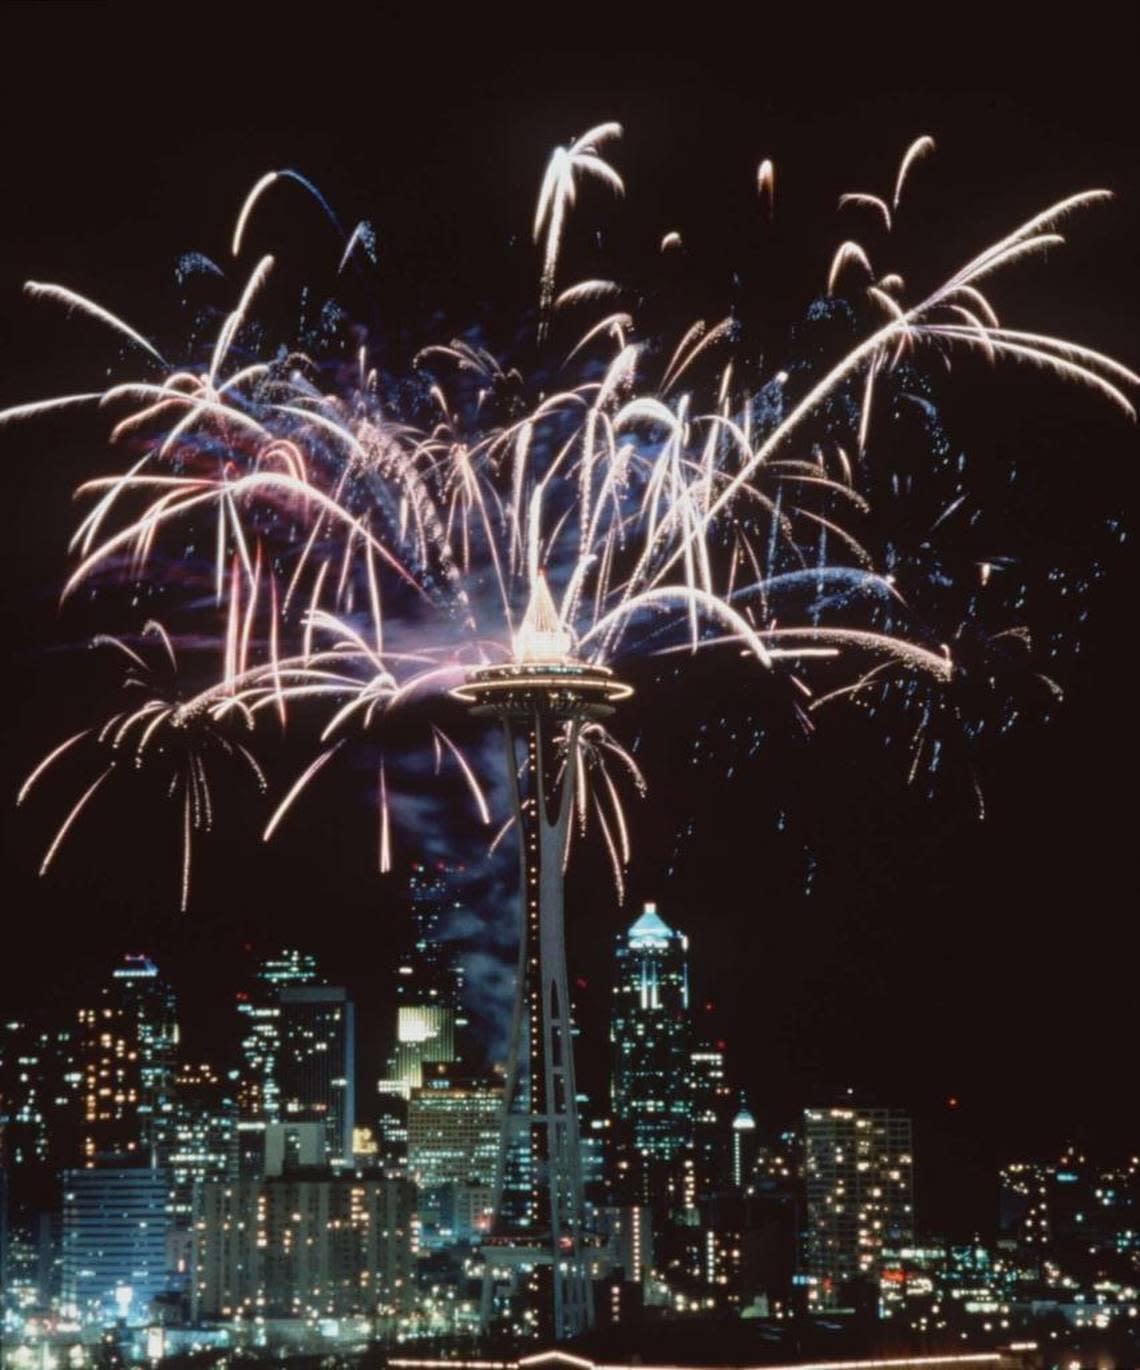 New Year’s Eve at the Space Needle Expanded event to broadcast live